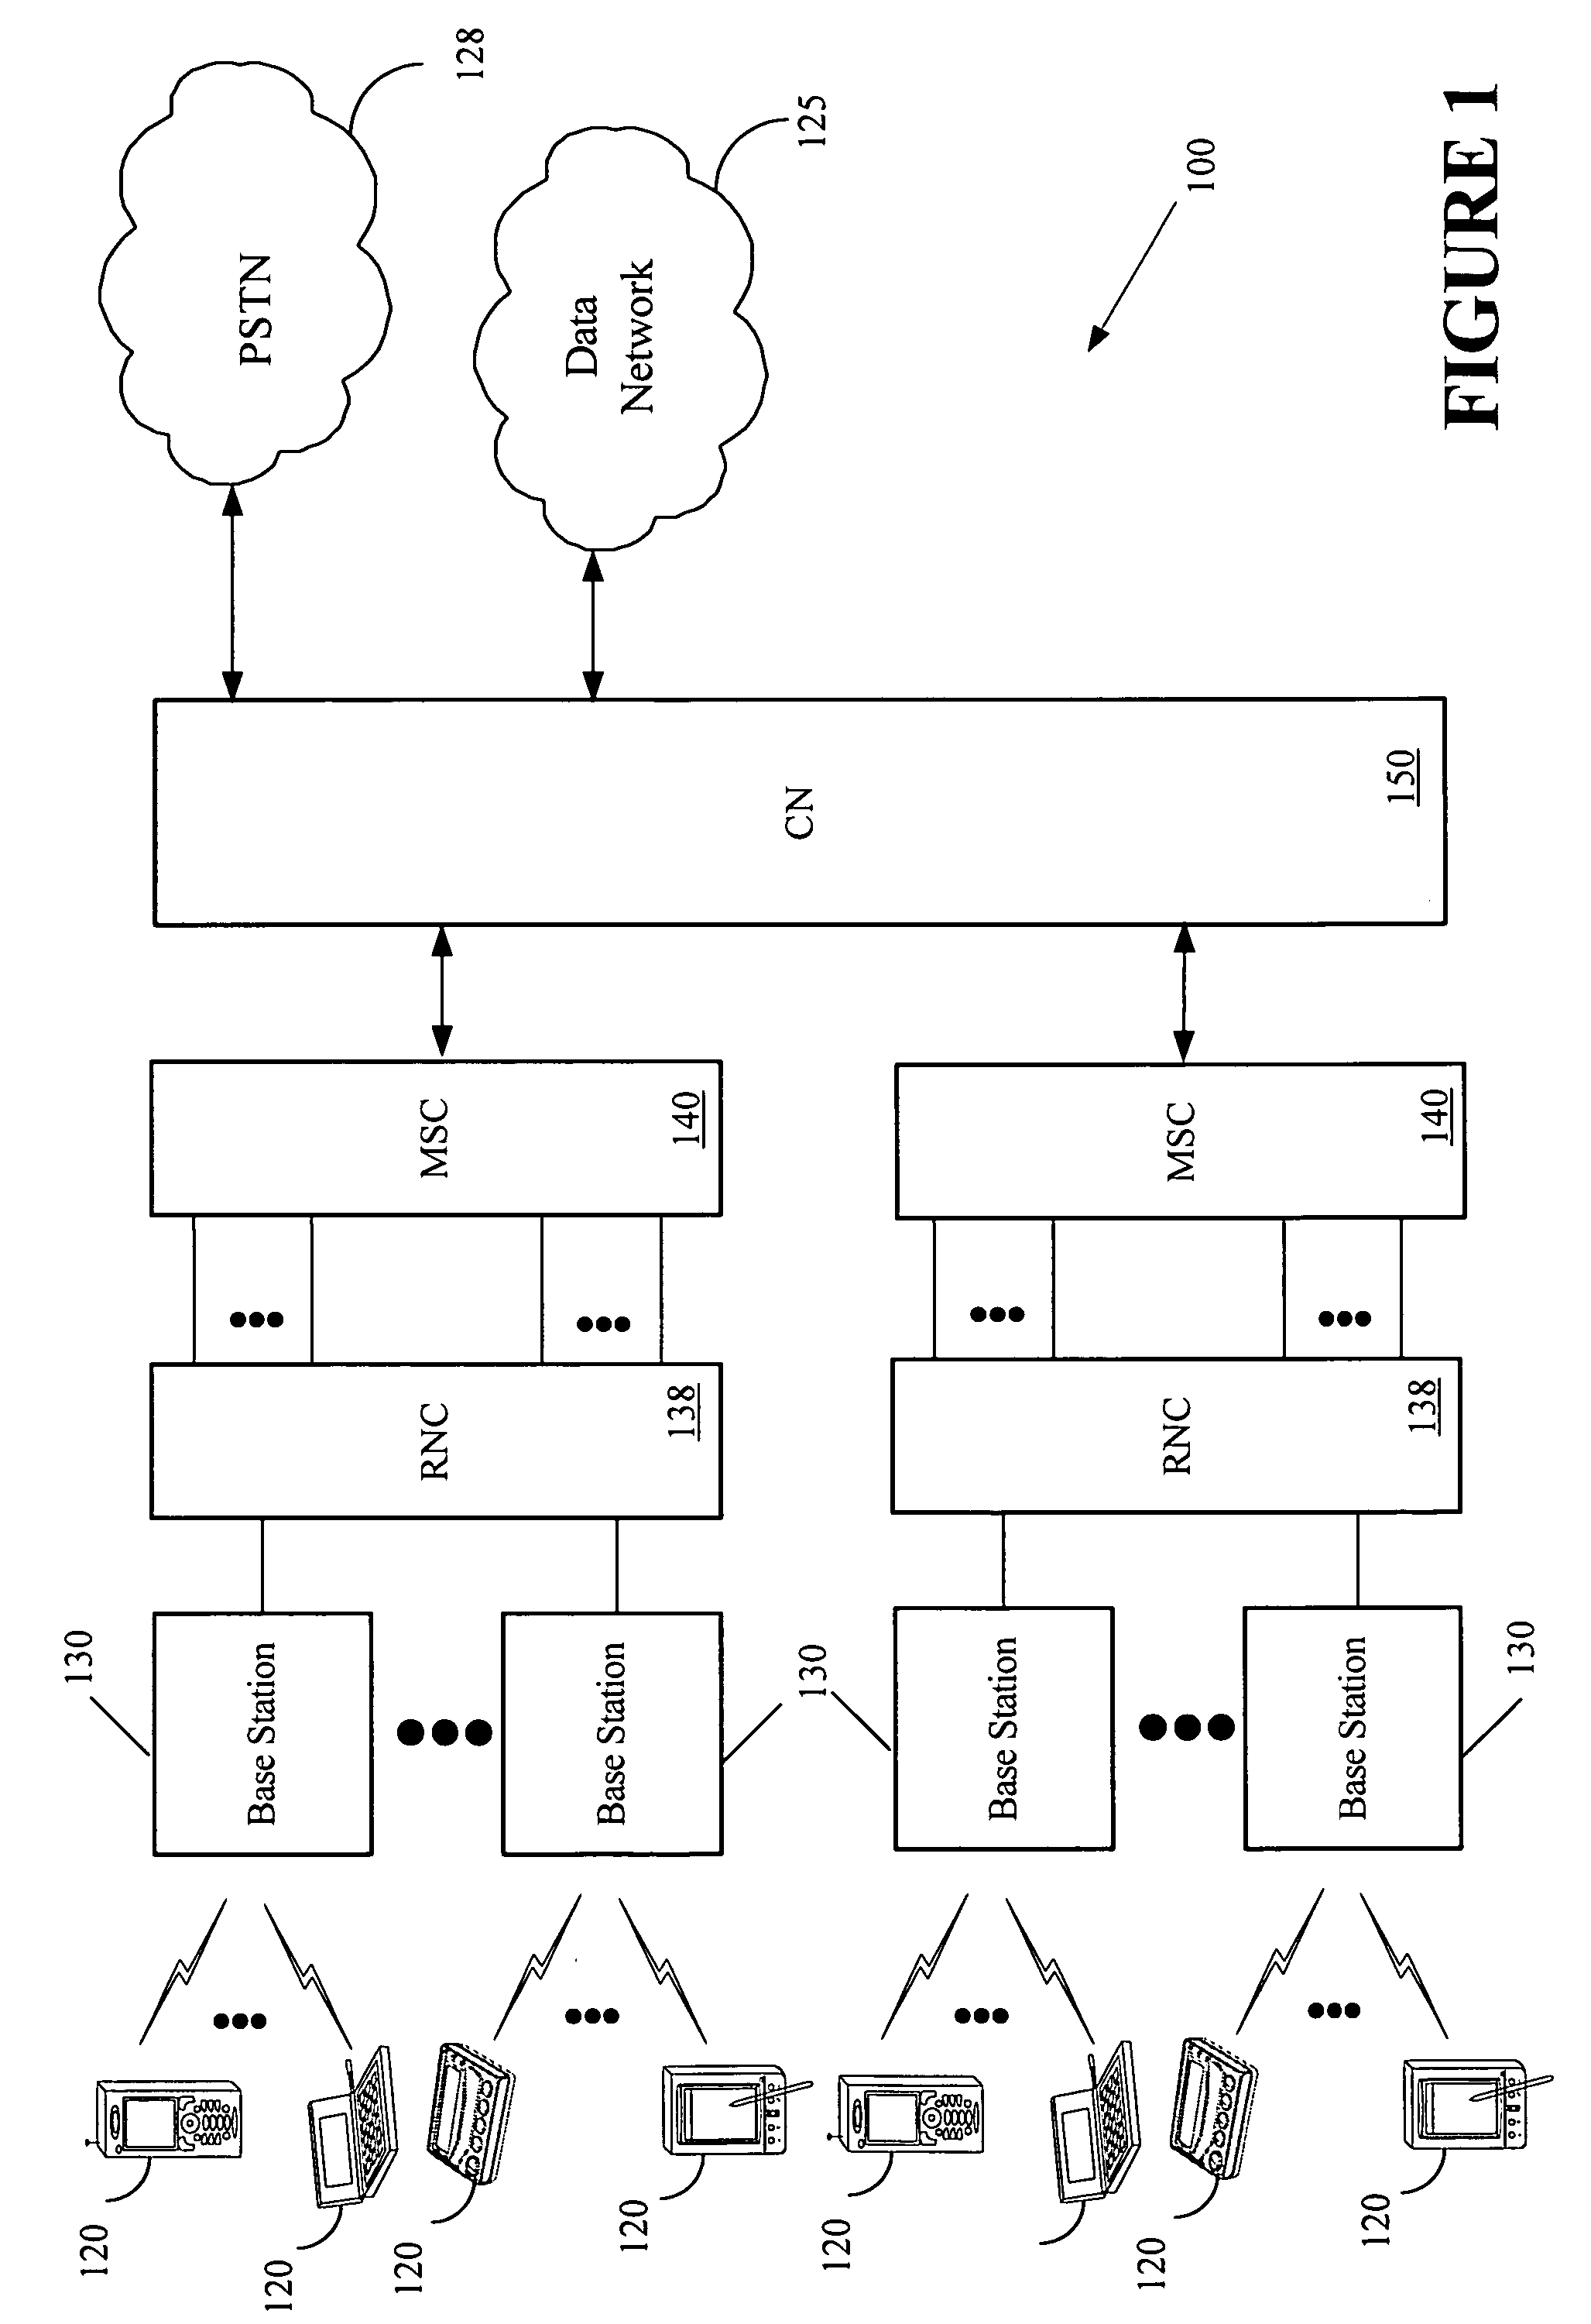 Method for migrating a mobile station identity from a mobile identification number to an international mobile station identity